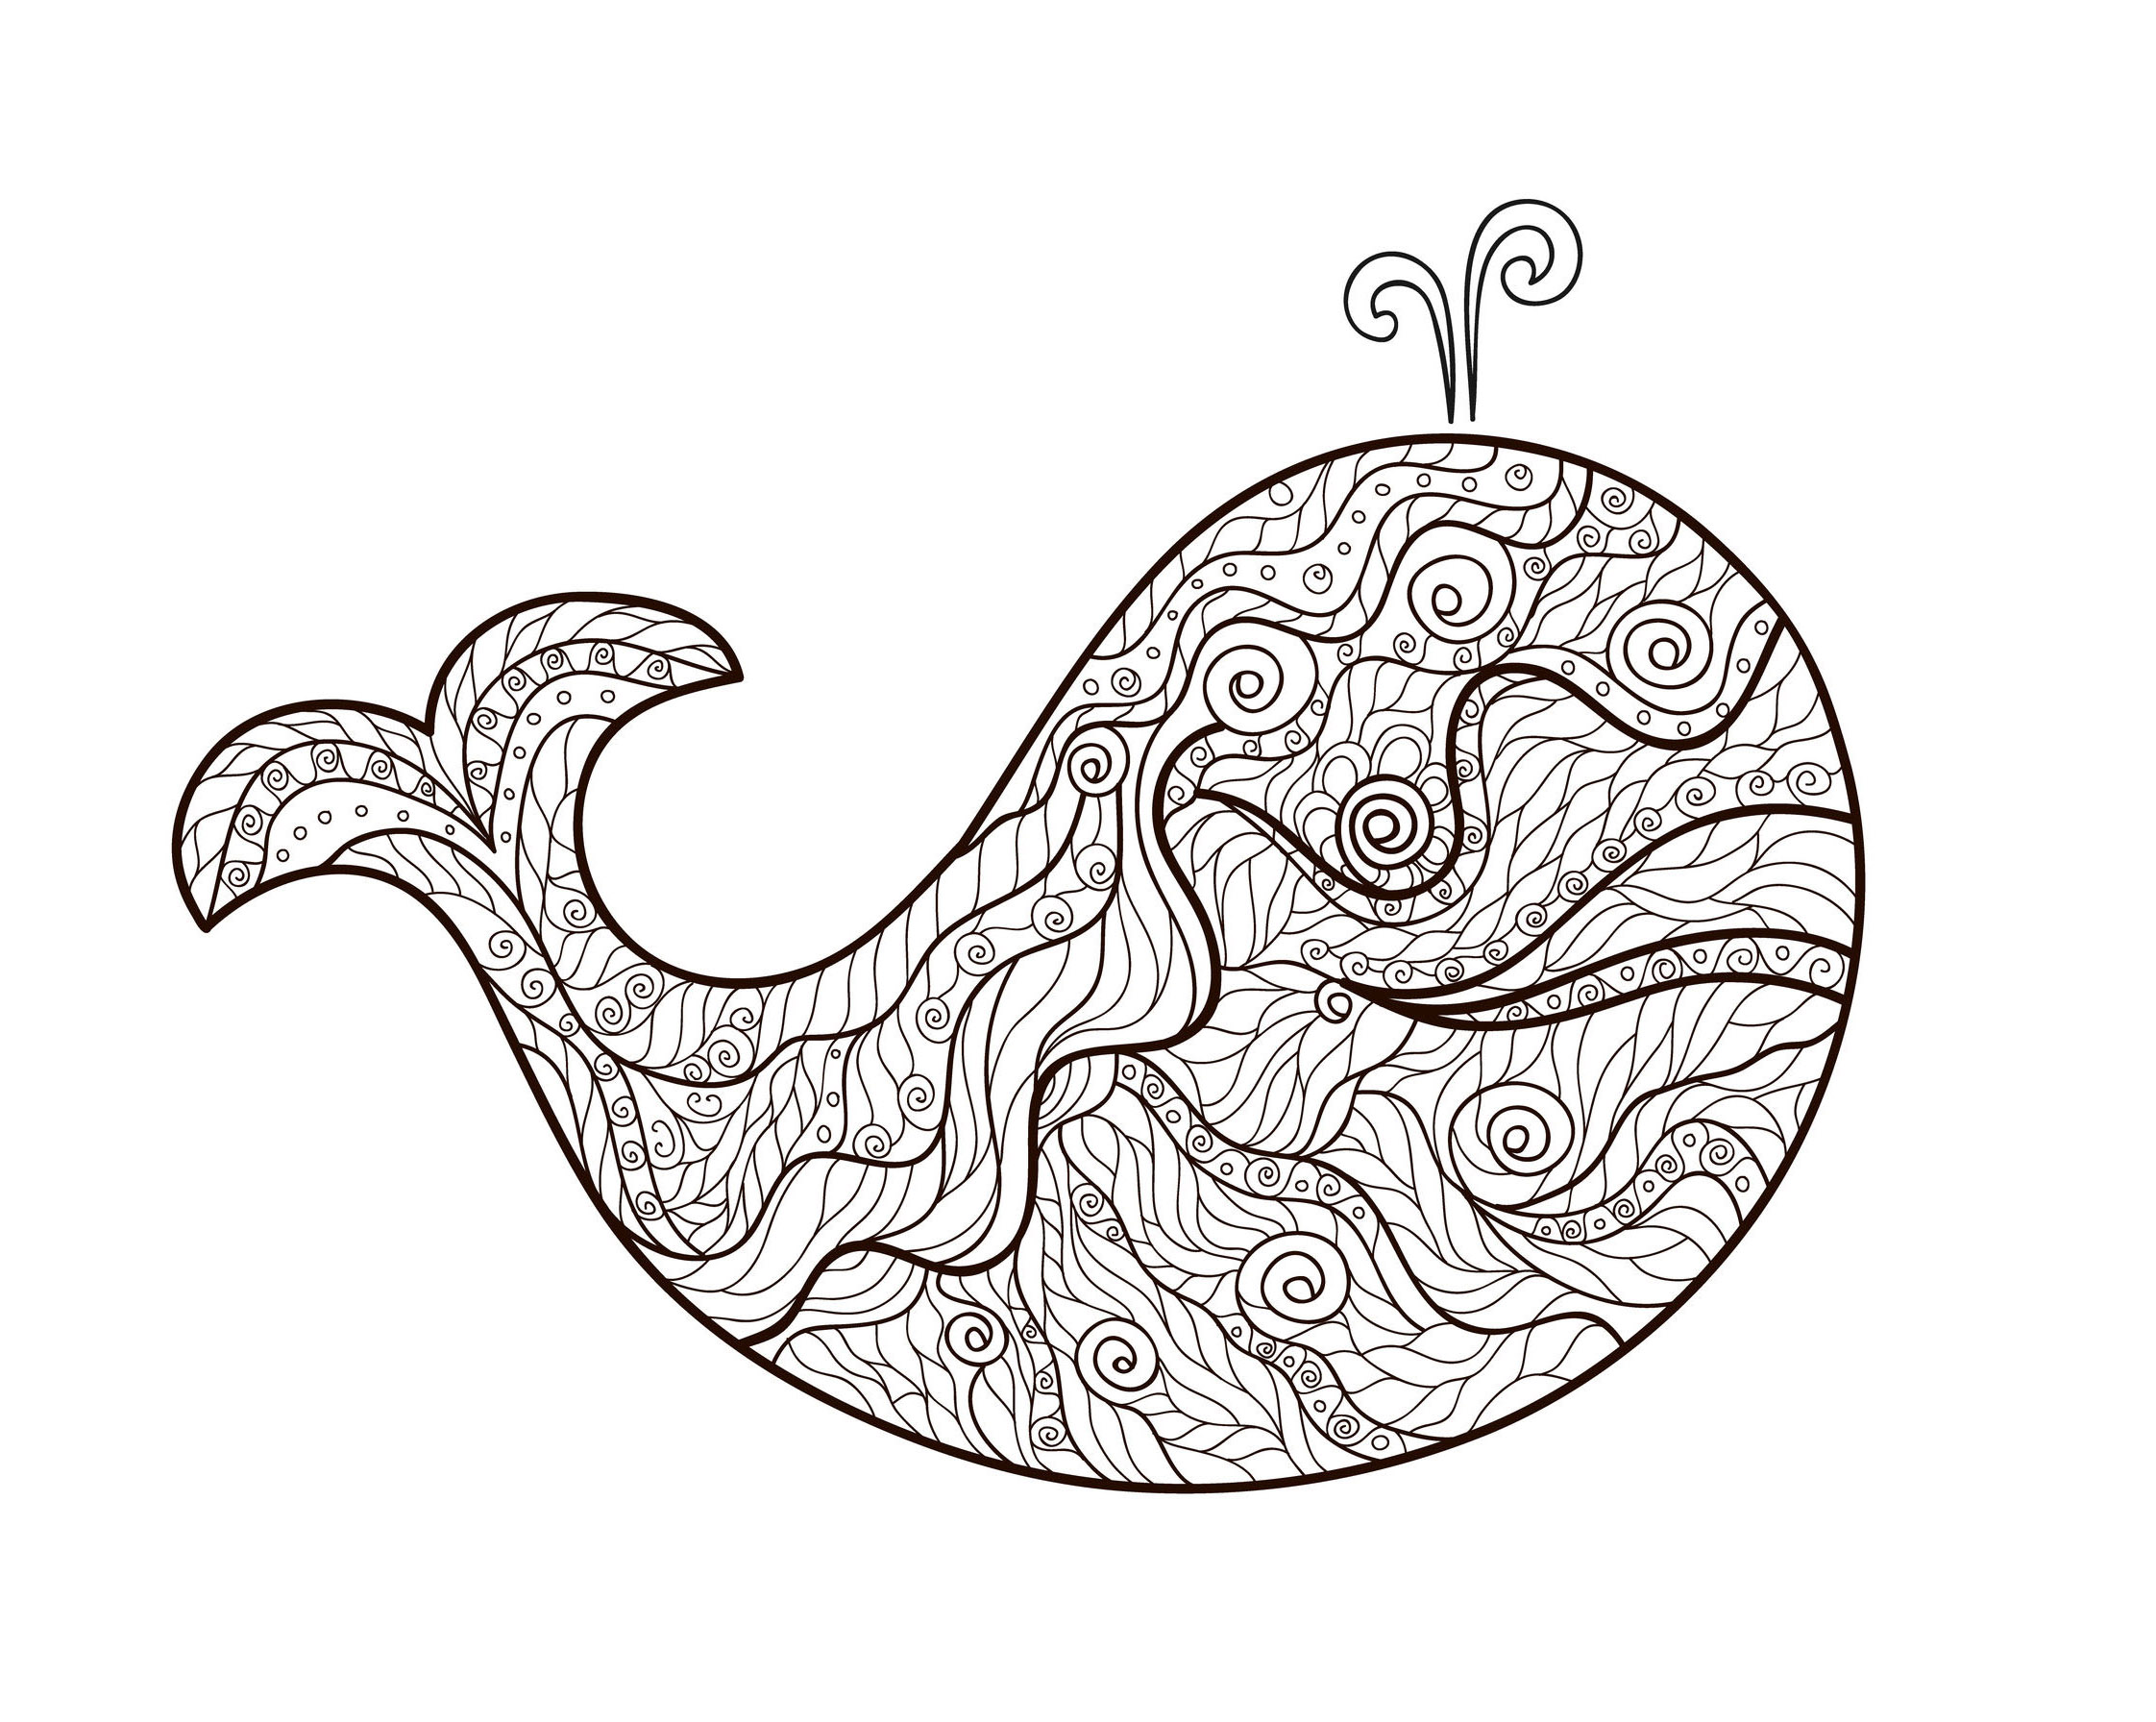 Cool Whale, Zentangle to color